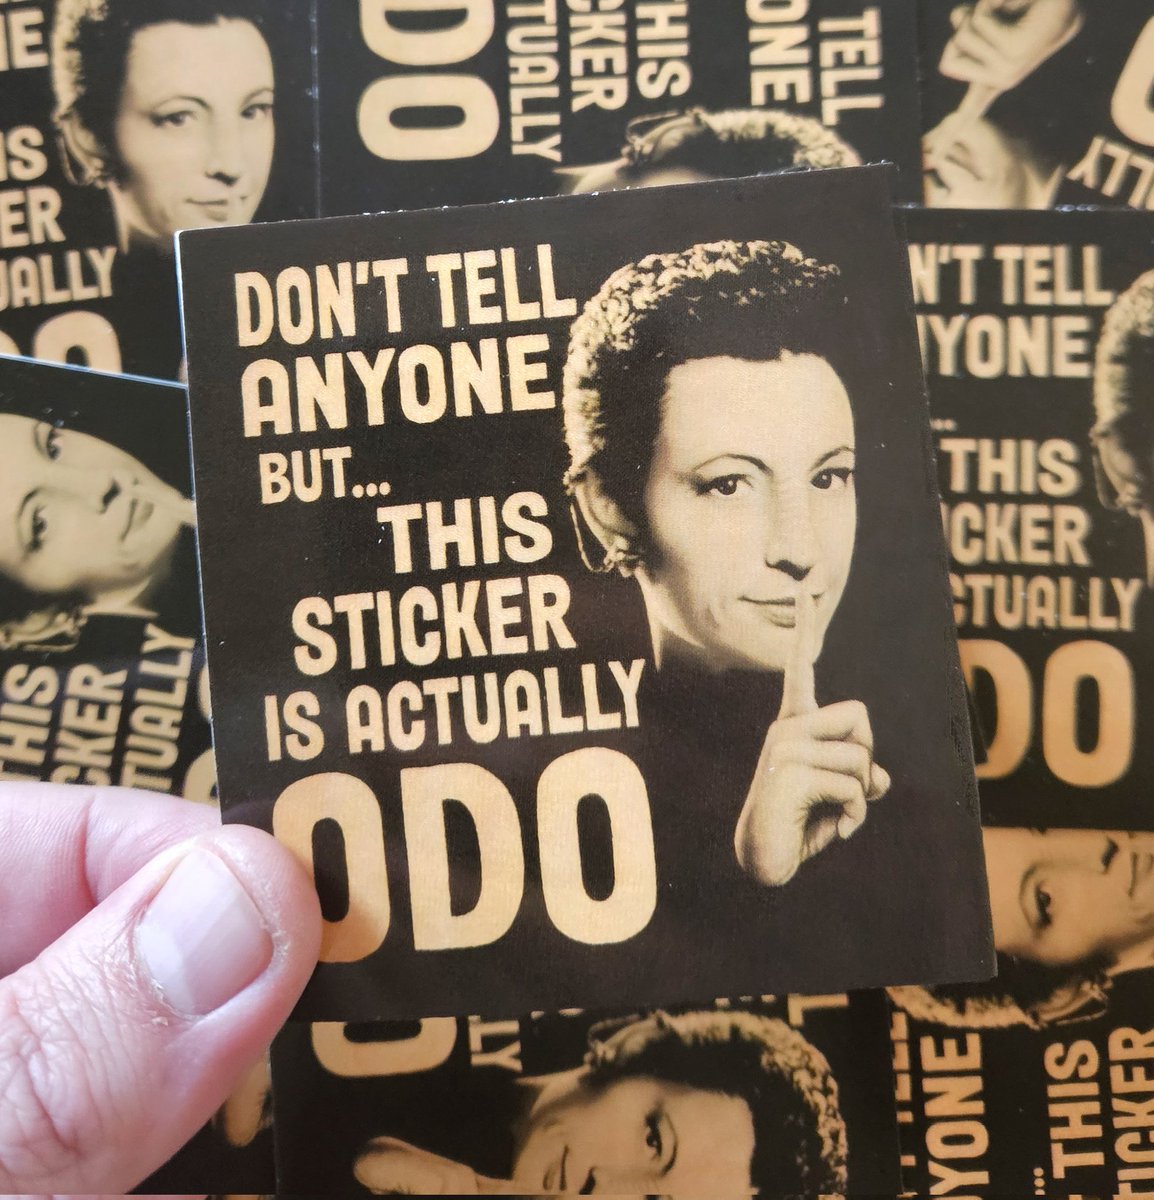 Odo stickers are here! 3.5'x3.25' UV resistant, waterproof, dishwasher safe, and *probably* won't turn into a liquid every sixteen hours. Pick one up at willburrows.art/shop